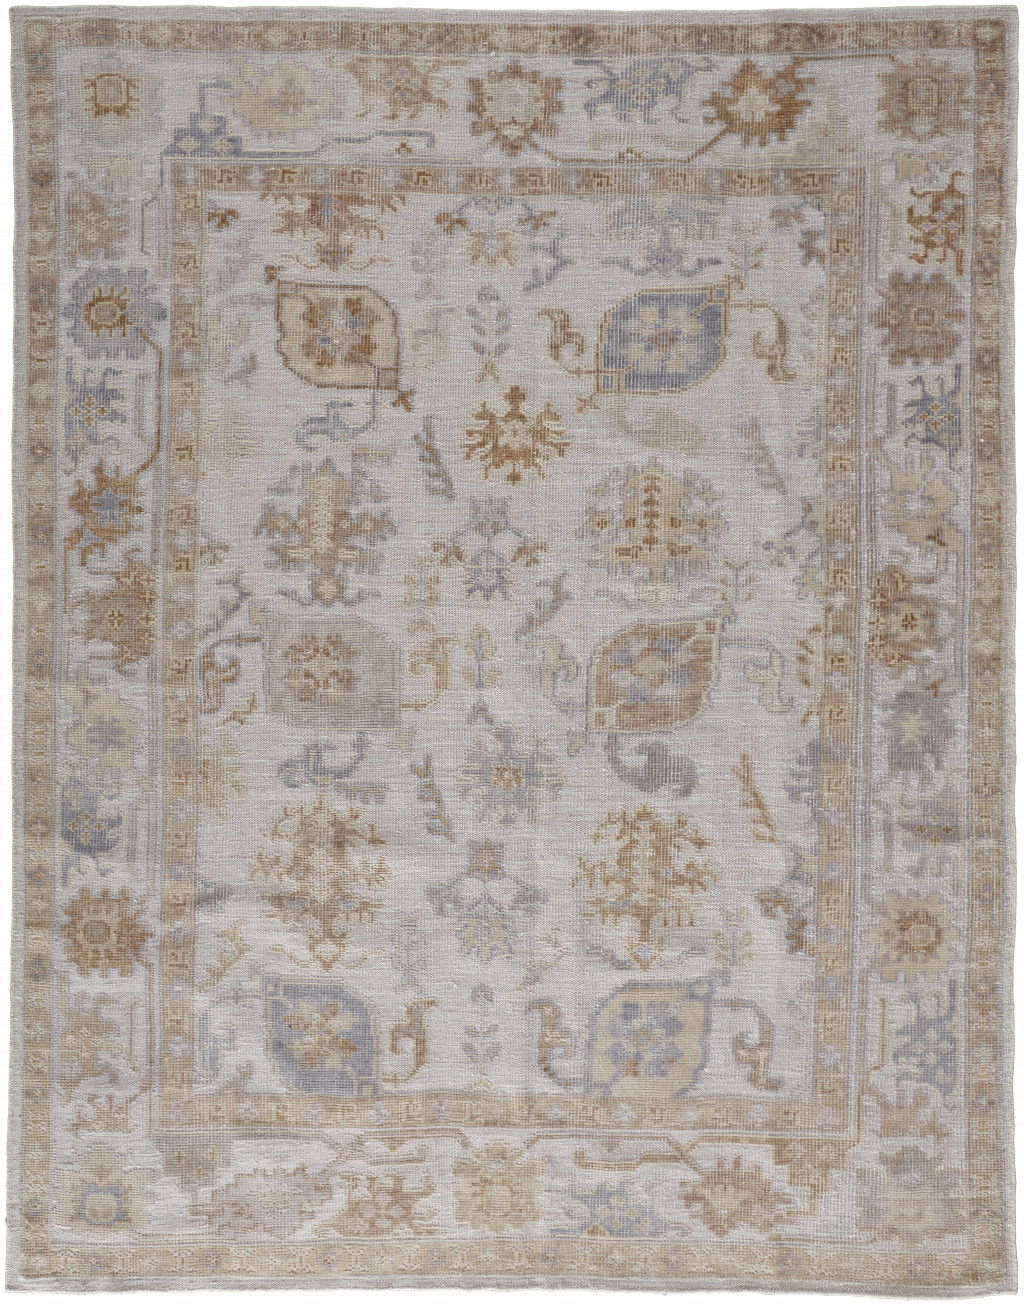 8' X 10' Ivory And Tan Floral Hand Knotted Stain Resistant Area Rug-514979-1